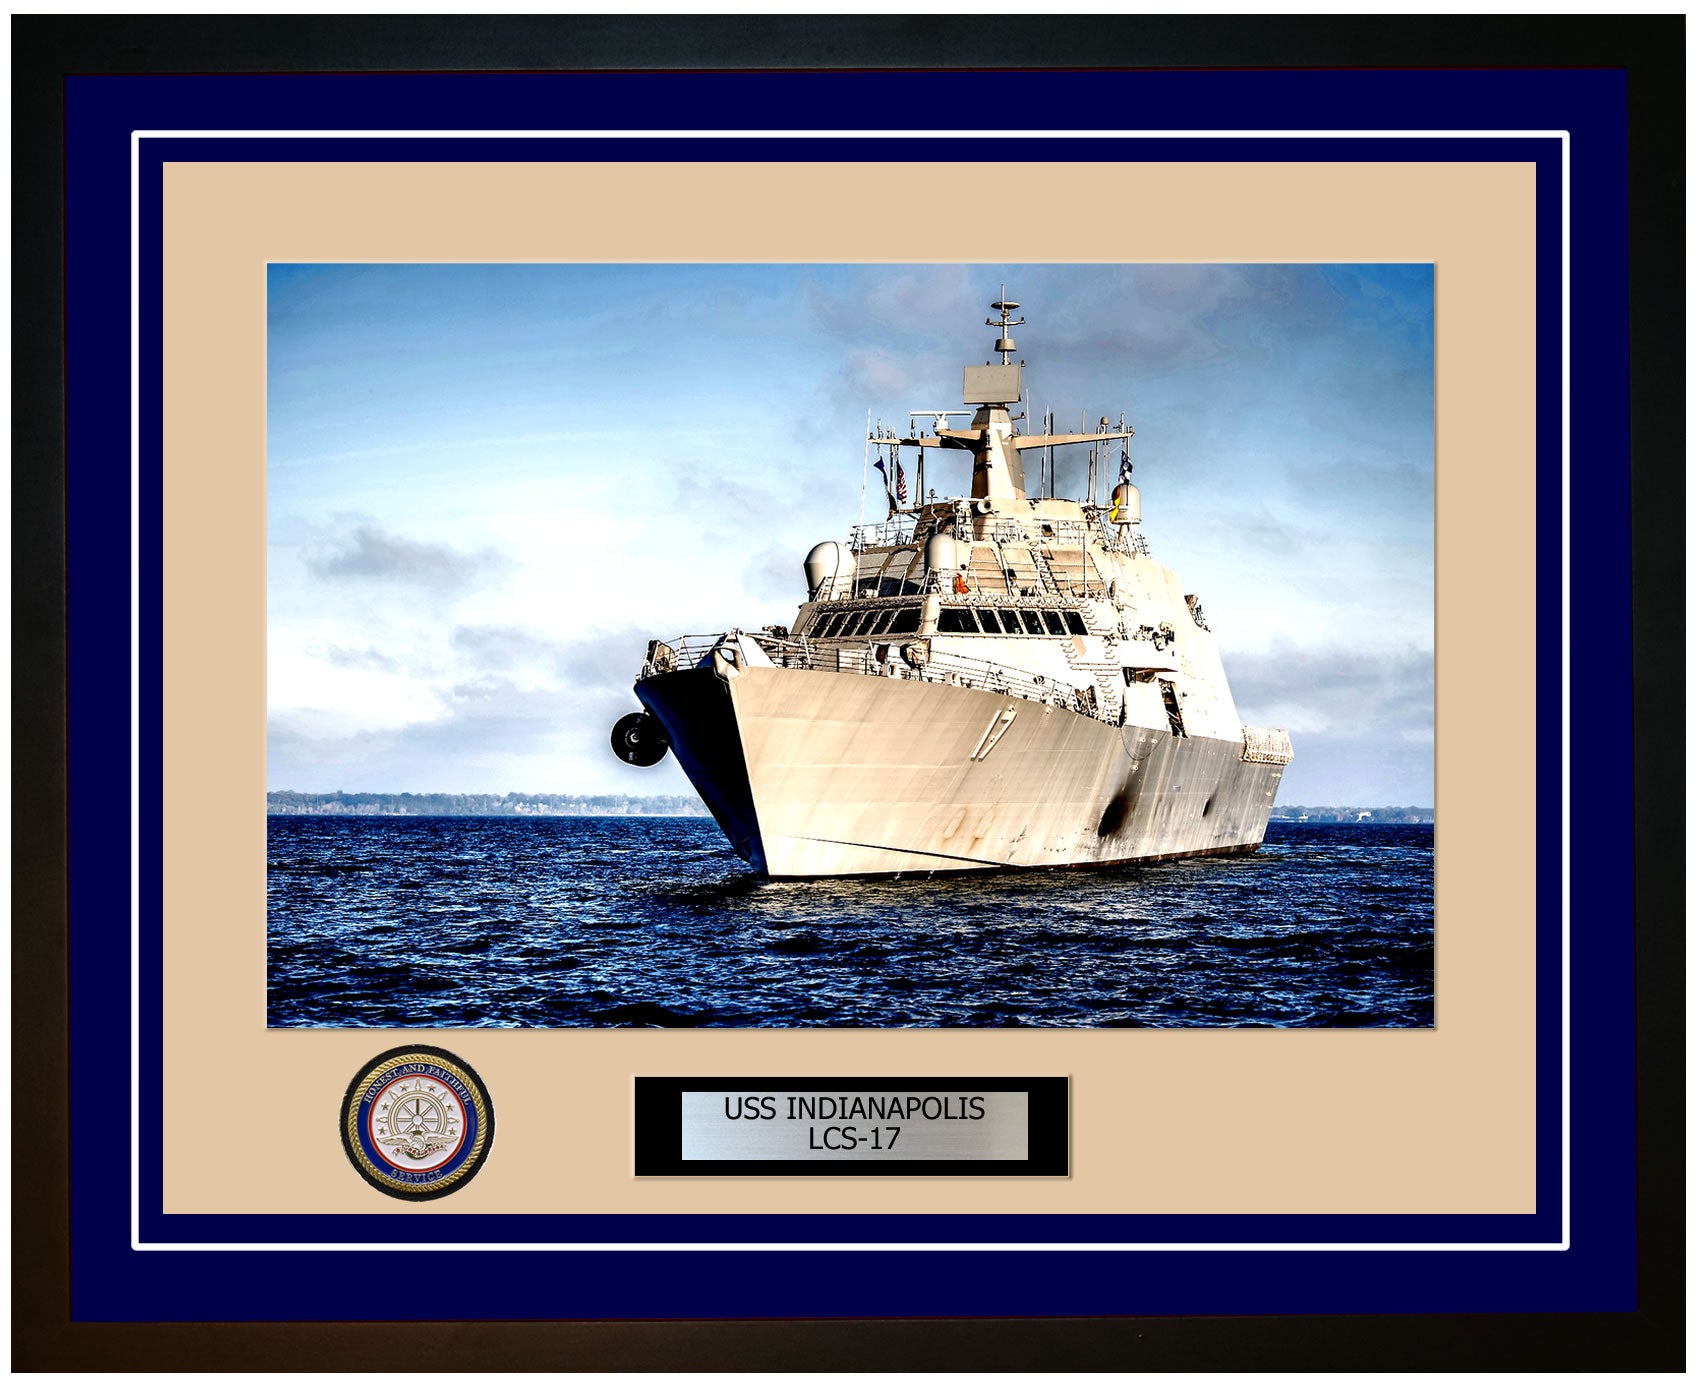 USS Indianapolis LCS-17 Framed Navy Ship Photo Blue